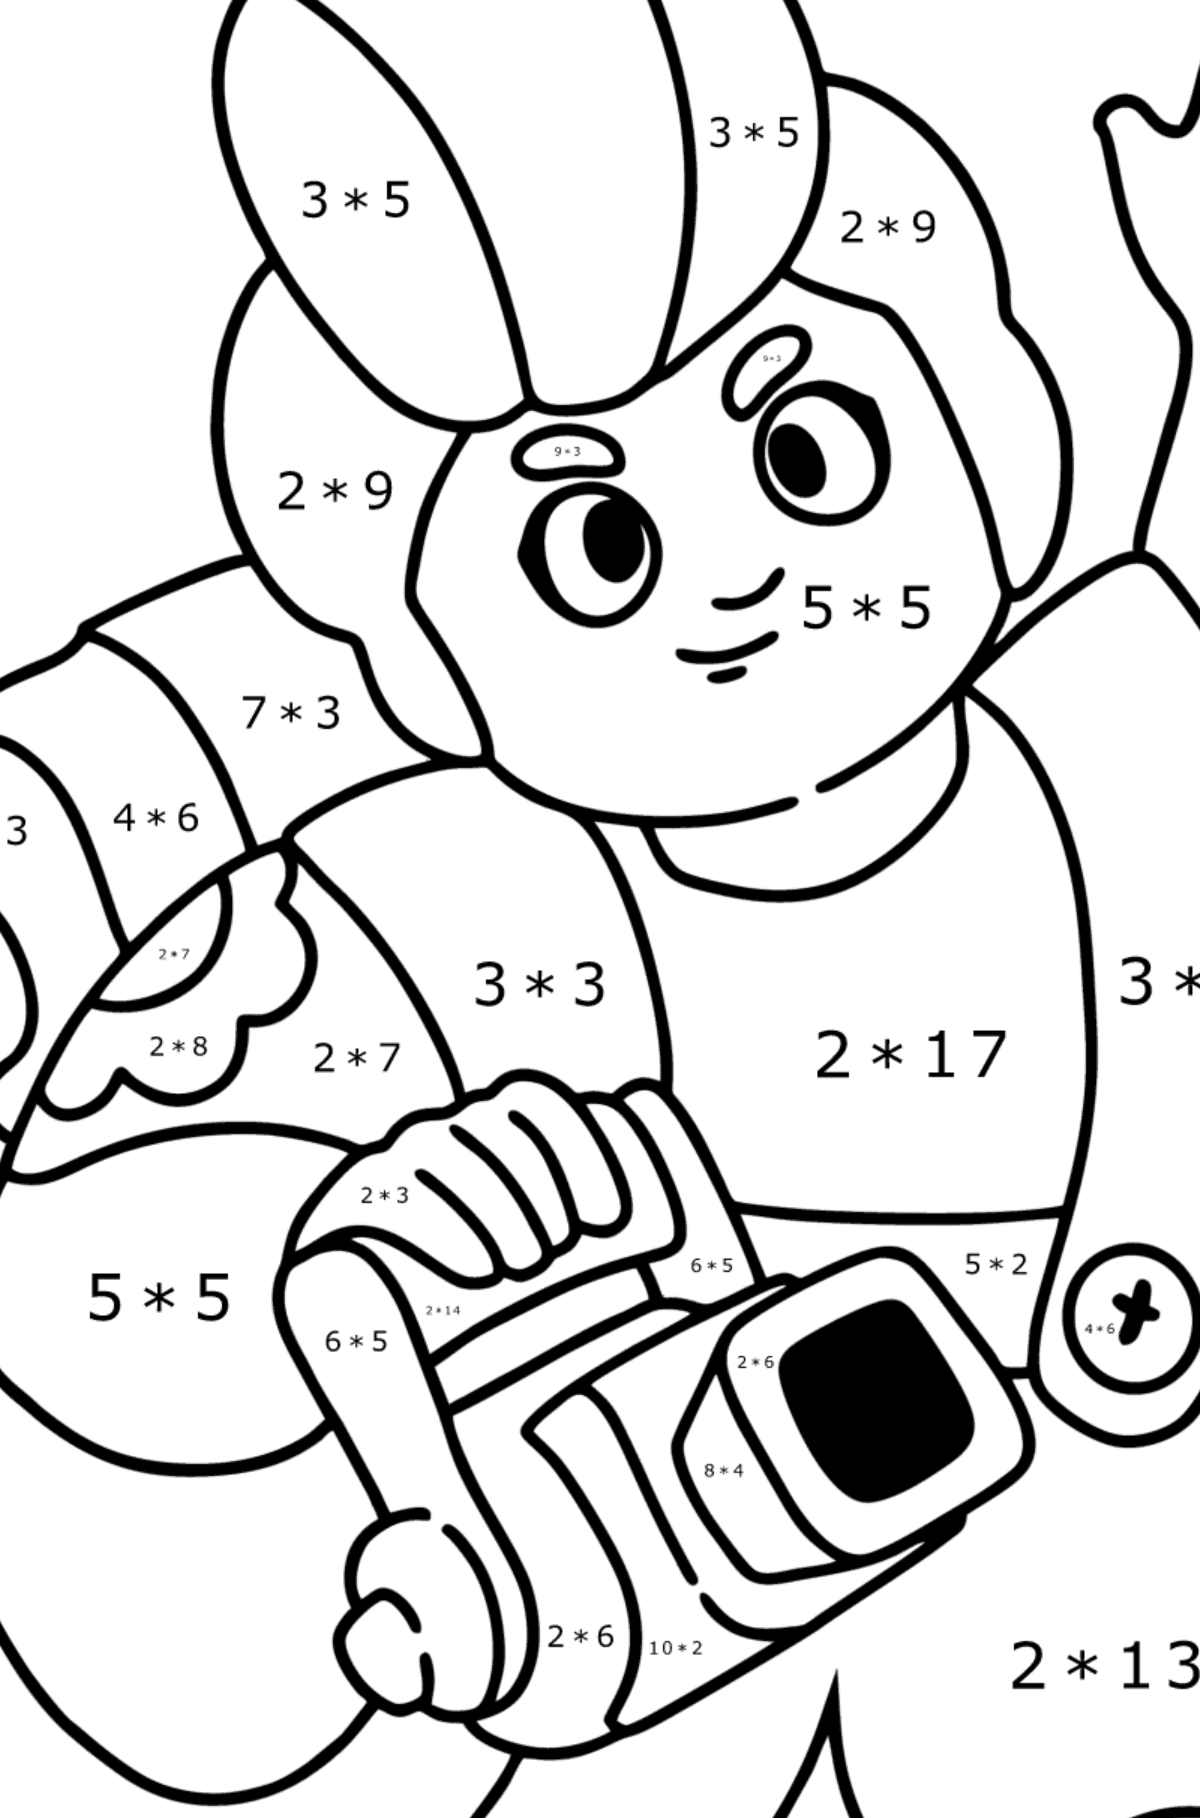 Brawl Stars Pam coloring page - Math Coloring - Multiplication for Kids